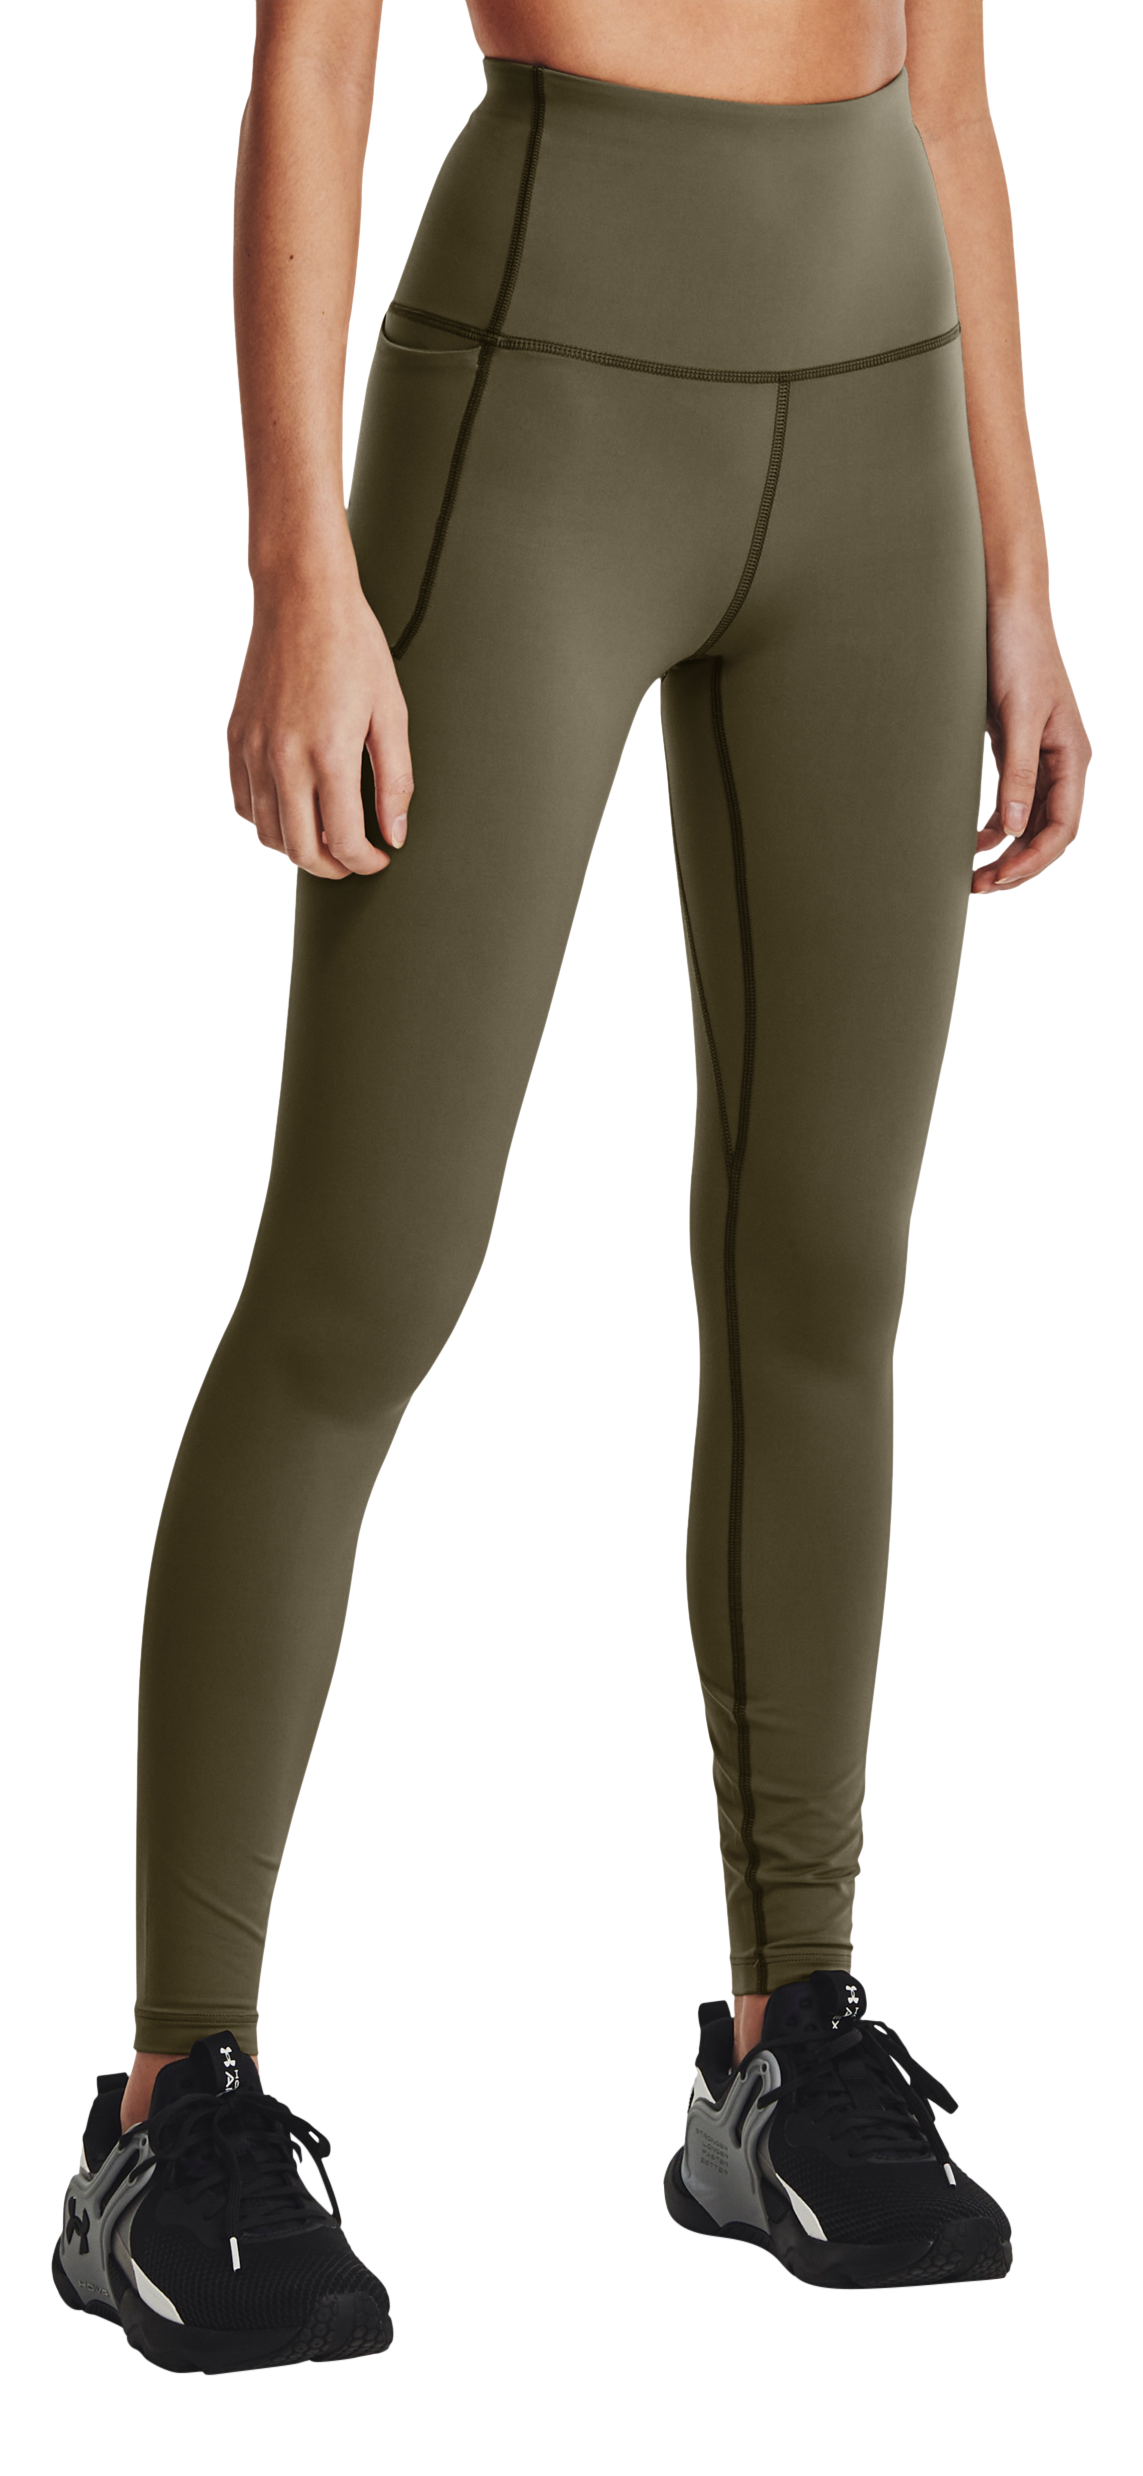 Under Armour Meridian Ultra High Rise Leggings for Ladies - Tent/Metallic Silver - S